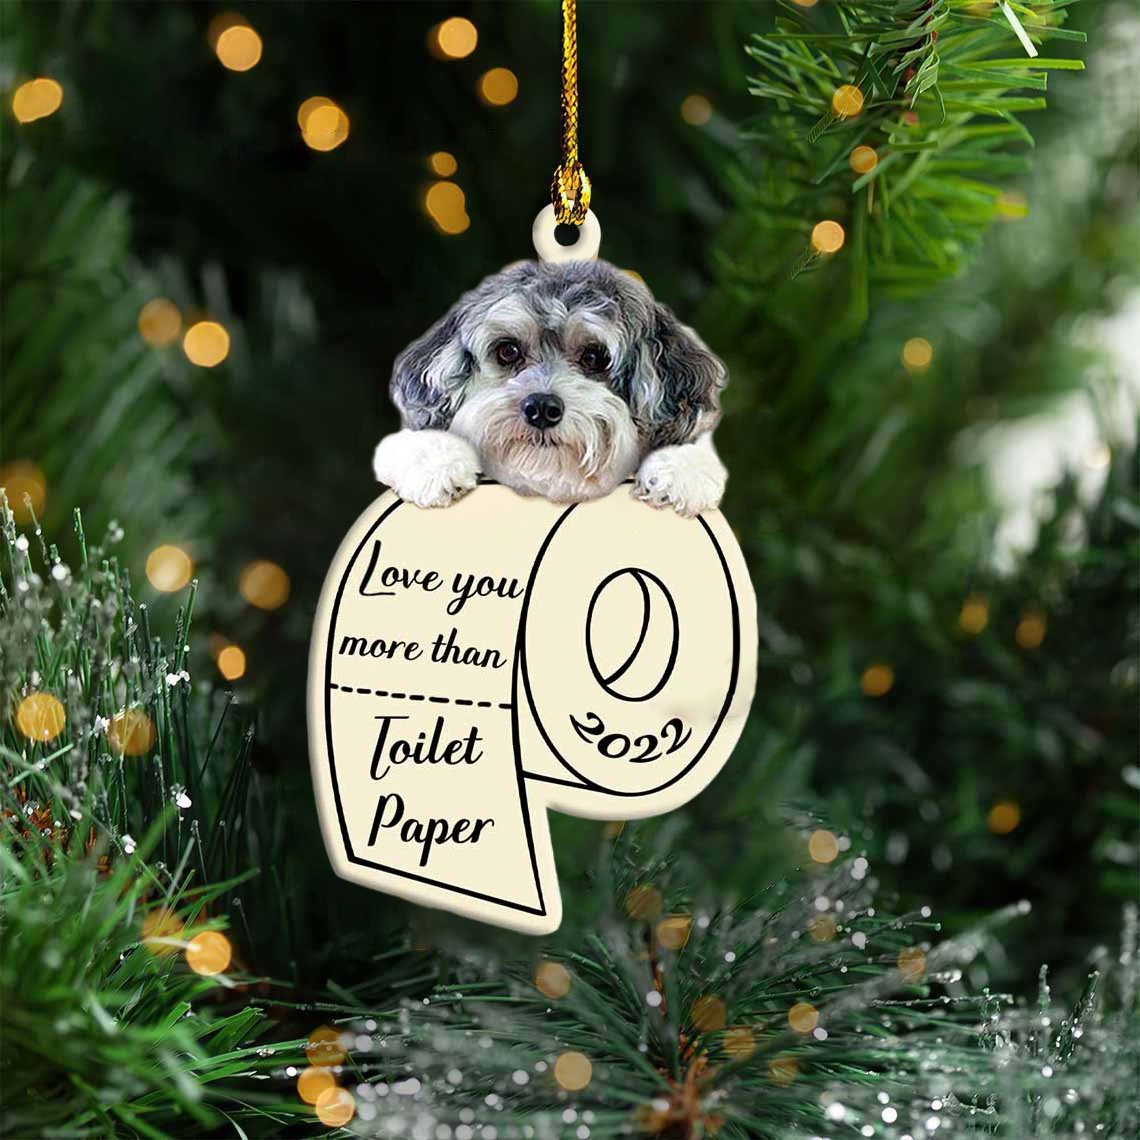 Maltipoo Love You More Than Toilet Paper 2022 Hanging Ornament